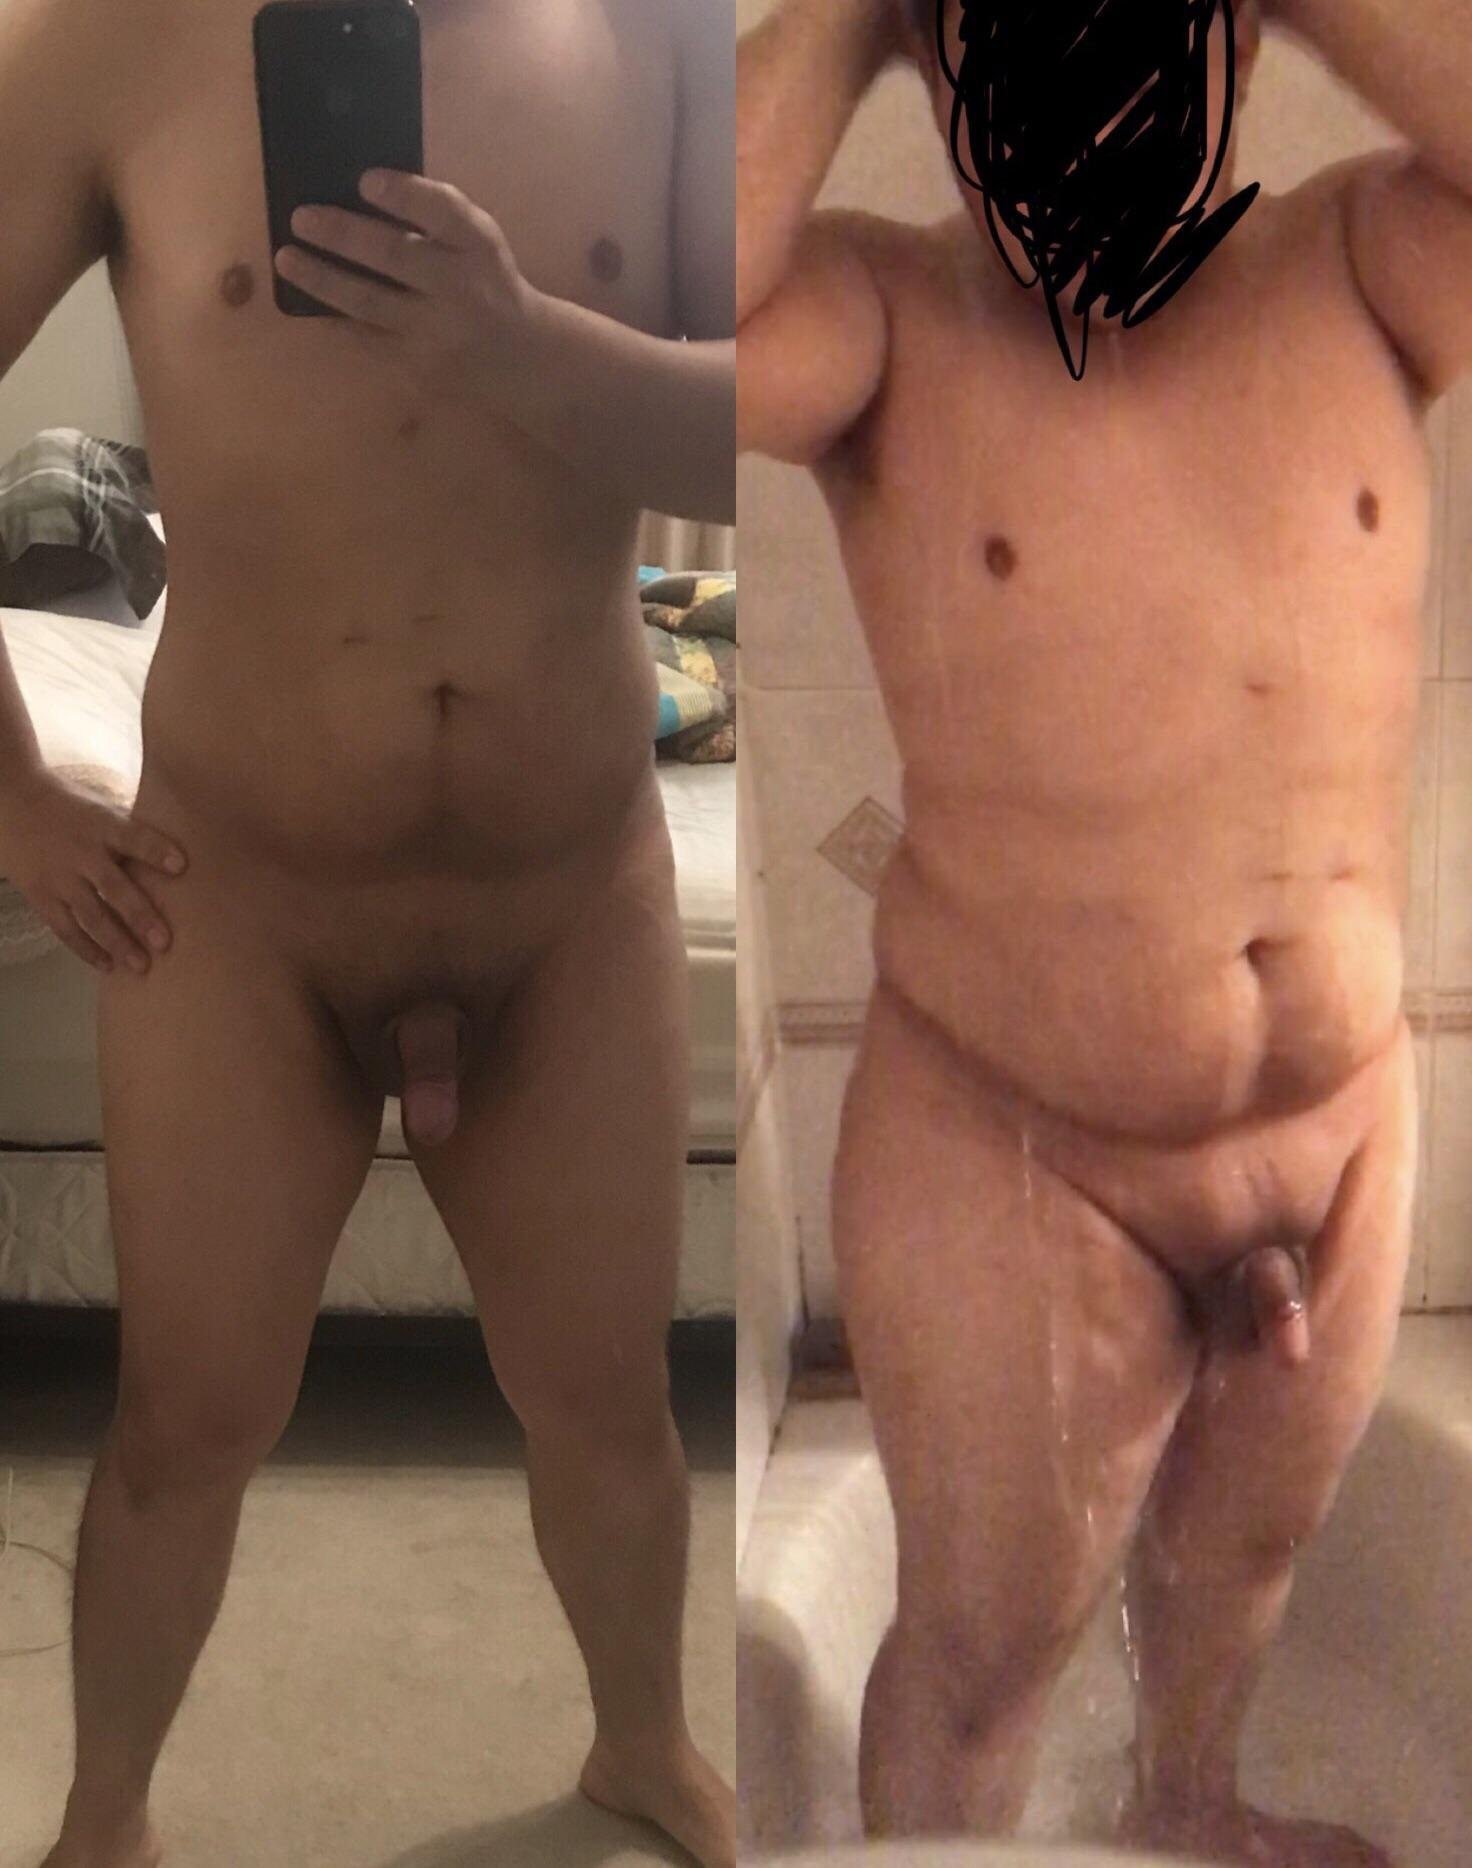 M / 28 / 5’7”/ 169lbs now — Before: 227lbs lost over the past year. Still a work in progress. I’m looking to loose 15 more lbs. Fat Pad is still very visible and very embarrassing, will continue motivated until my small tool looks decent.